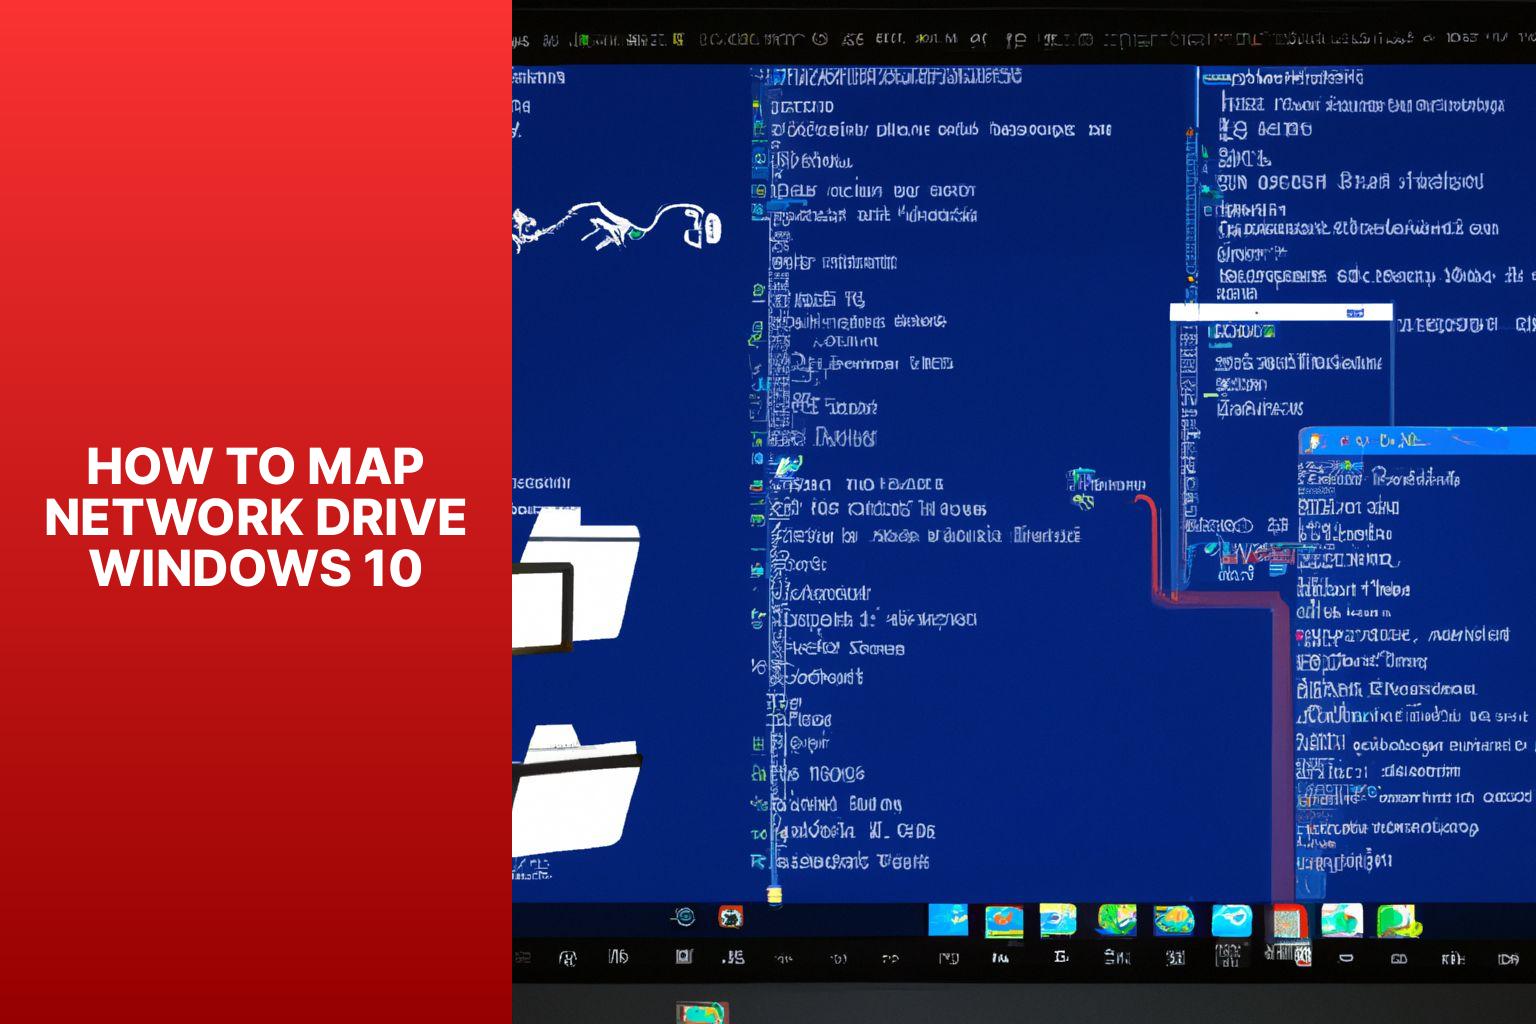 The Ultimate Guide to Mapping Network Drive Windows 10 for Easy File Sharing